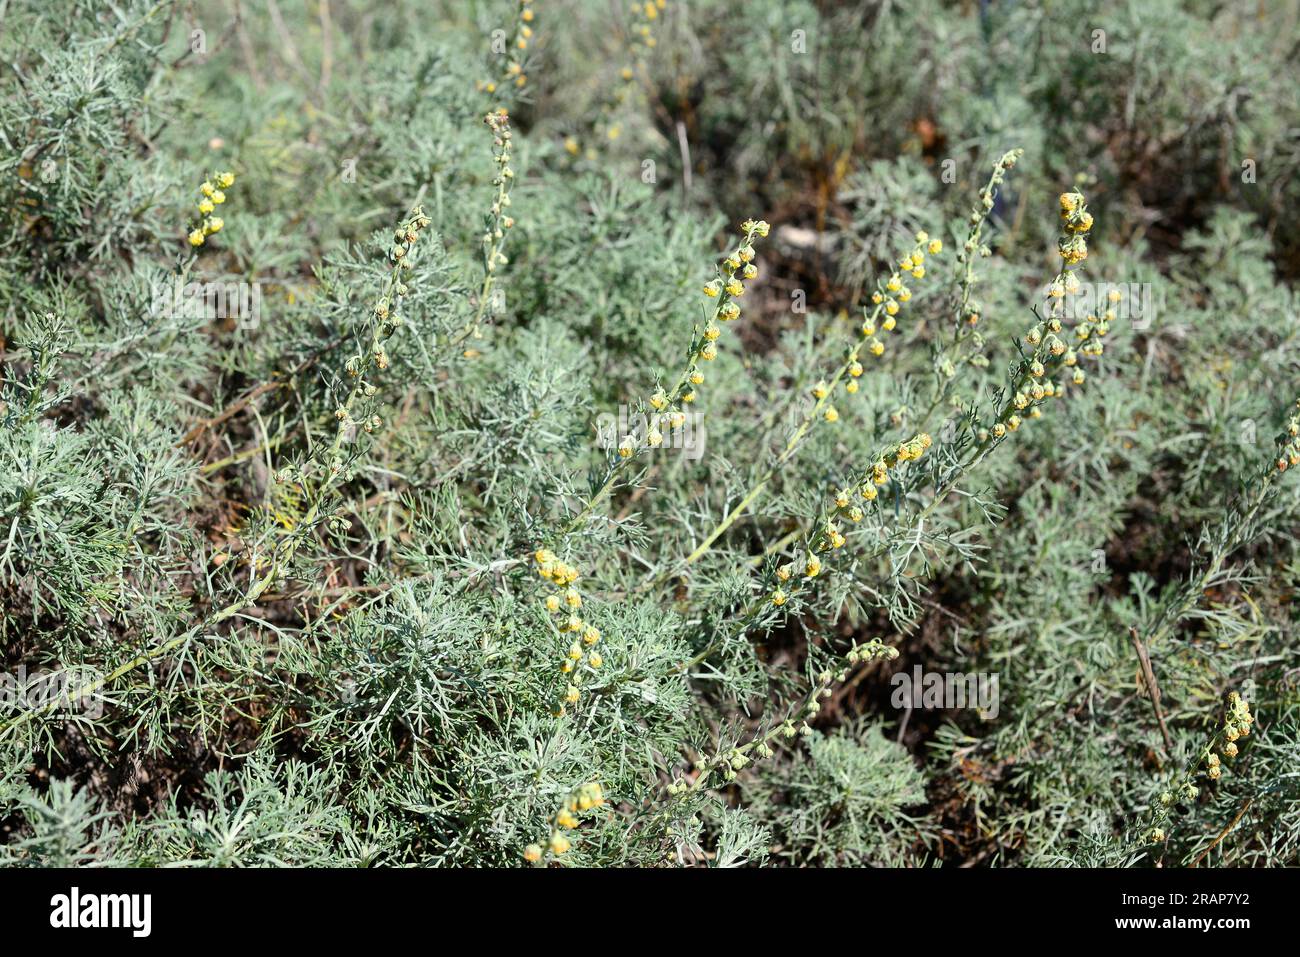 White wormwood (Artemisia alba) is a perennial shrub native to the Mediterranean region and Arabian Peninsula. Is a medicinal plant used as antiseptic Stock Photo